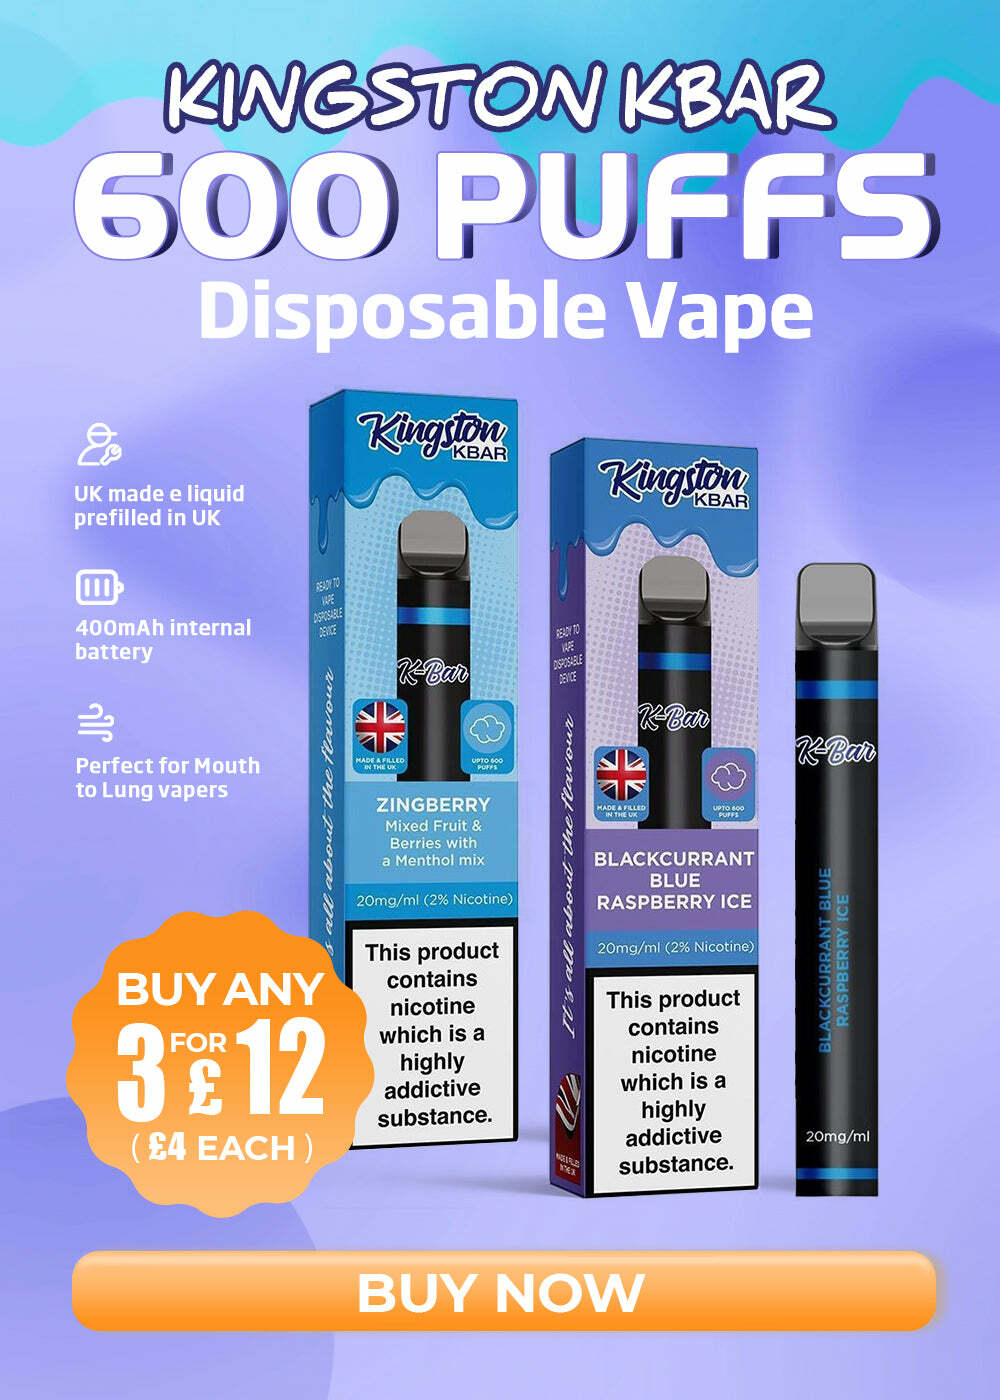  ZINGBERRY DRGNS LT BV BLACKCURRANT BLUE RASPBERRY ICE 20mgmi 2% Nicotine N s 20mgml 2% Nicotine This product contains BUY ANY P el i Ll S e nicotine This product FOR 1 2 whichis a contains highly nicotine addictive which is a substance. highly addictive substance. 4 EACH 